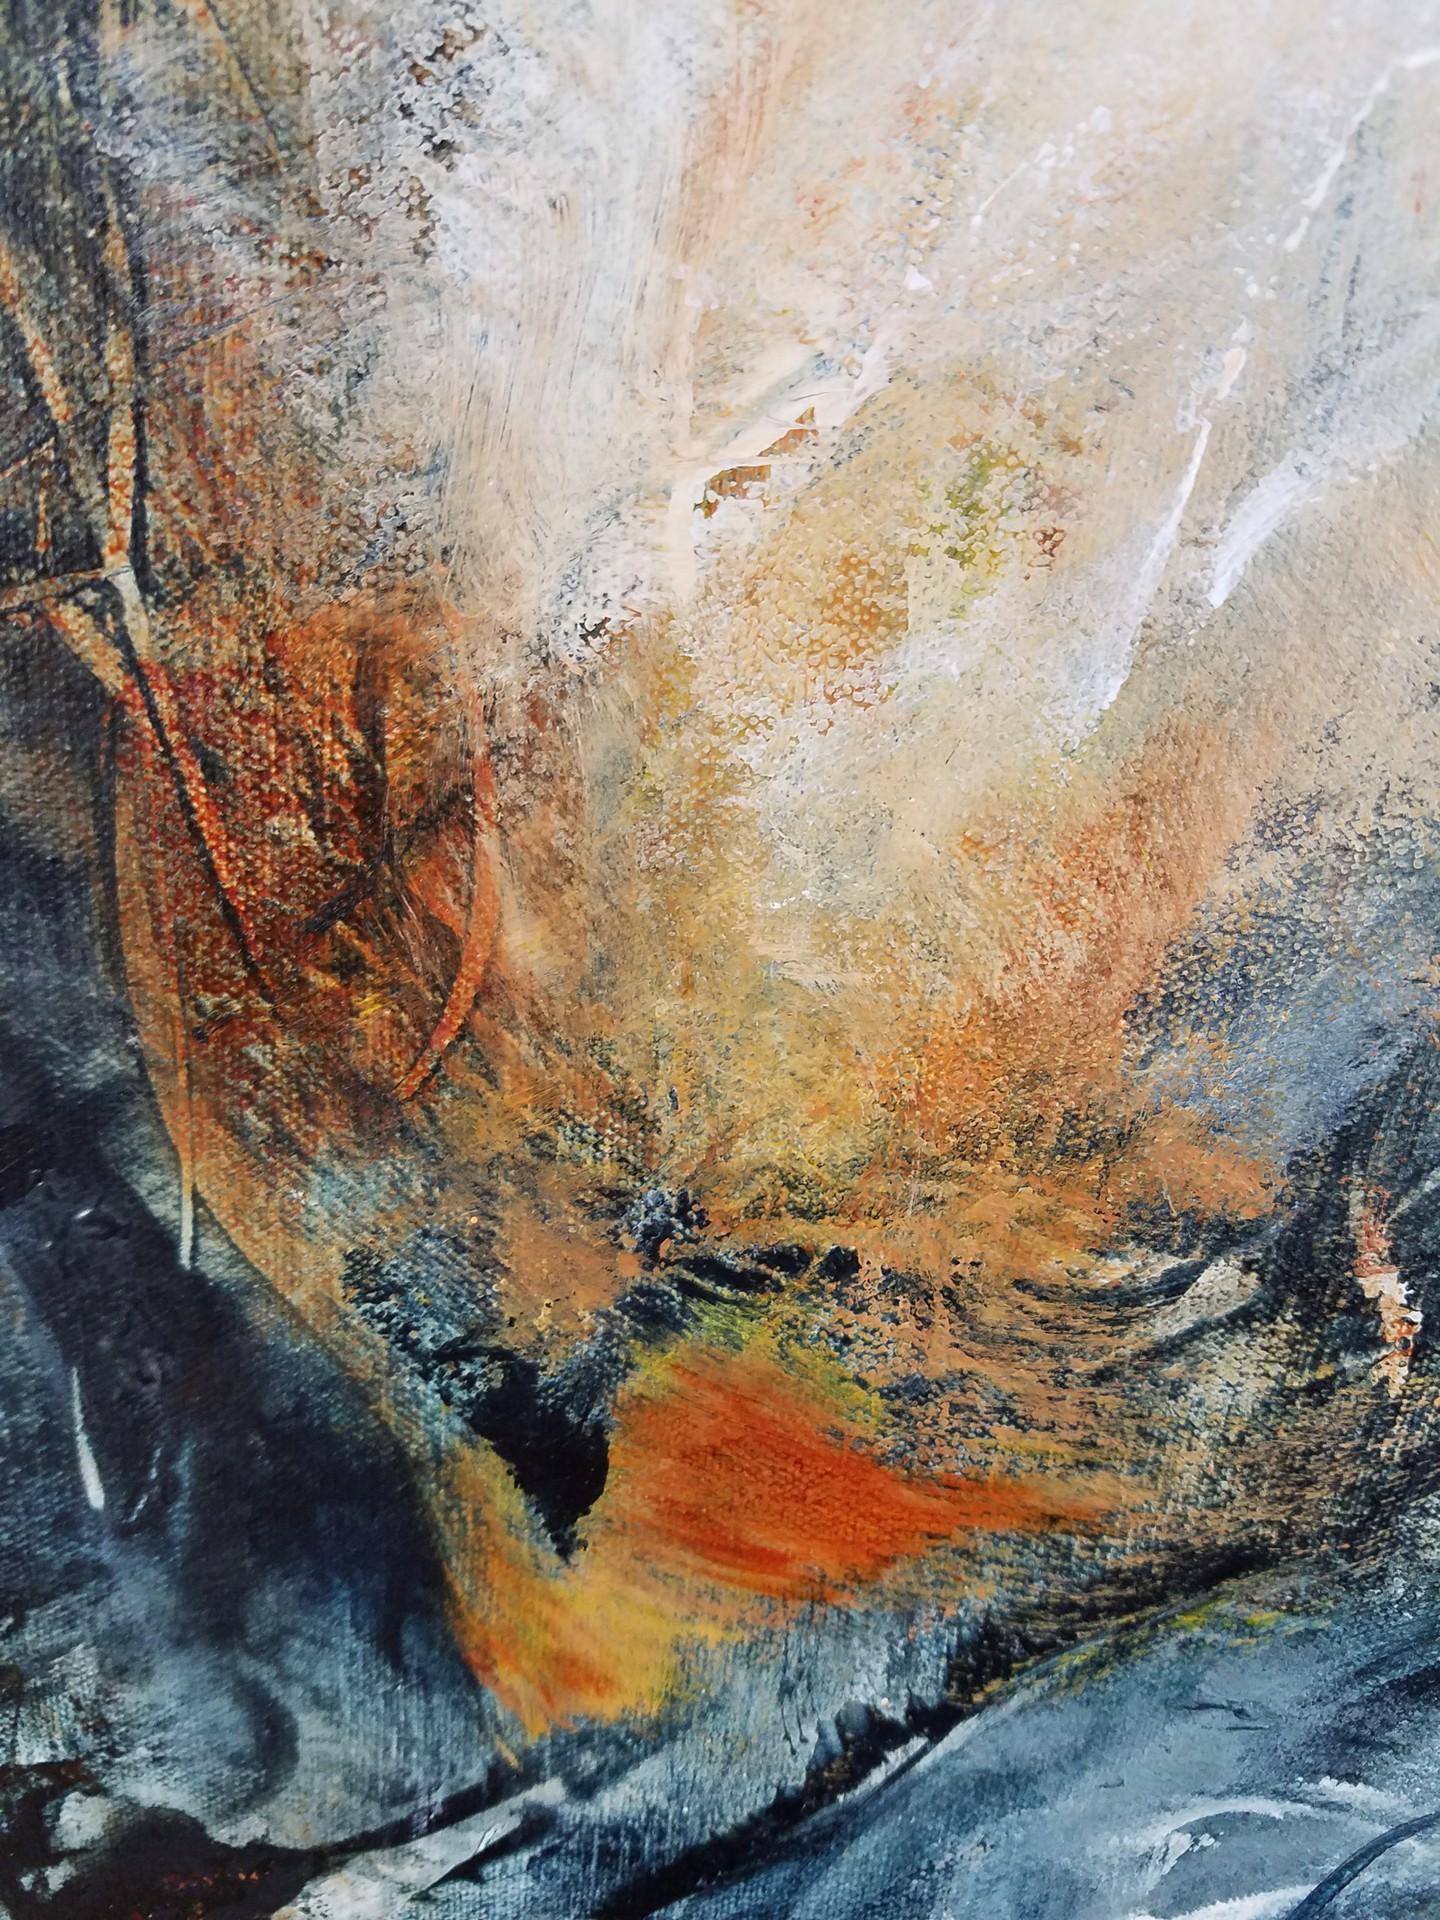 Bursting with deep blues and various earth tones with orange, 'Among the Roots' is an original acrylic painting by Washington-based artist Laurie Barmore.  As in other works by Laurie Barmore, this piece is exploding with both direction and visual